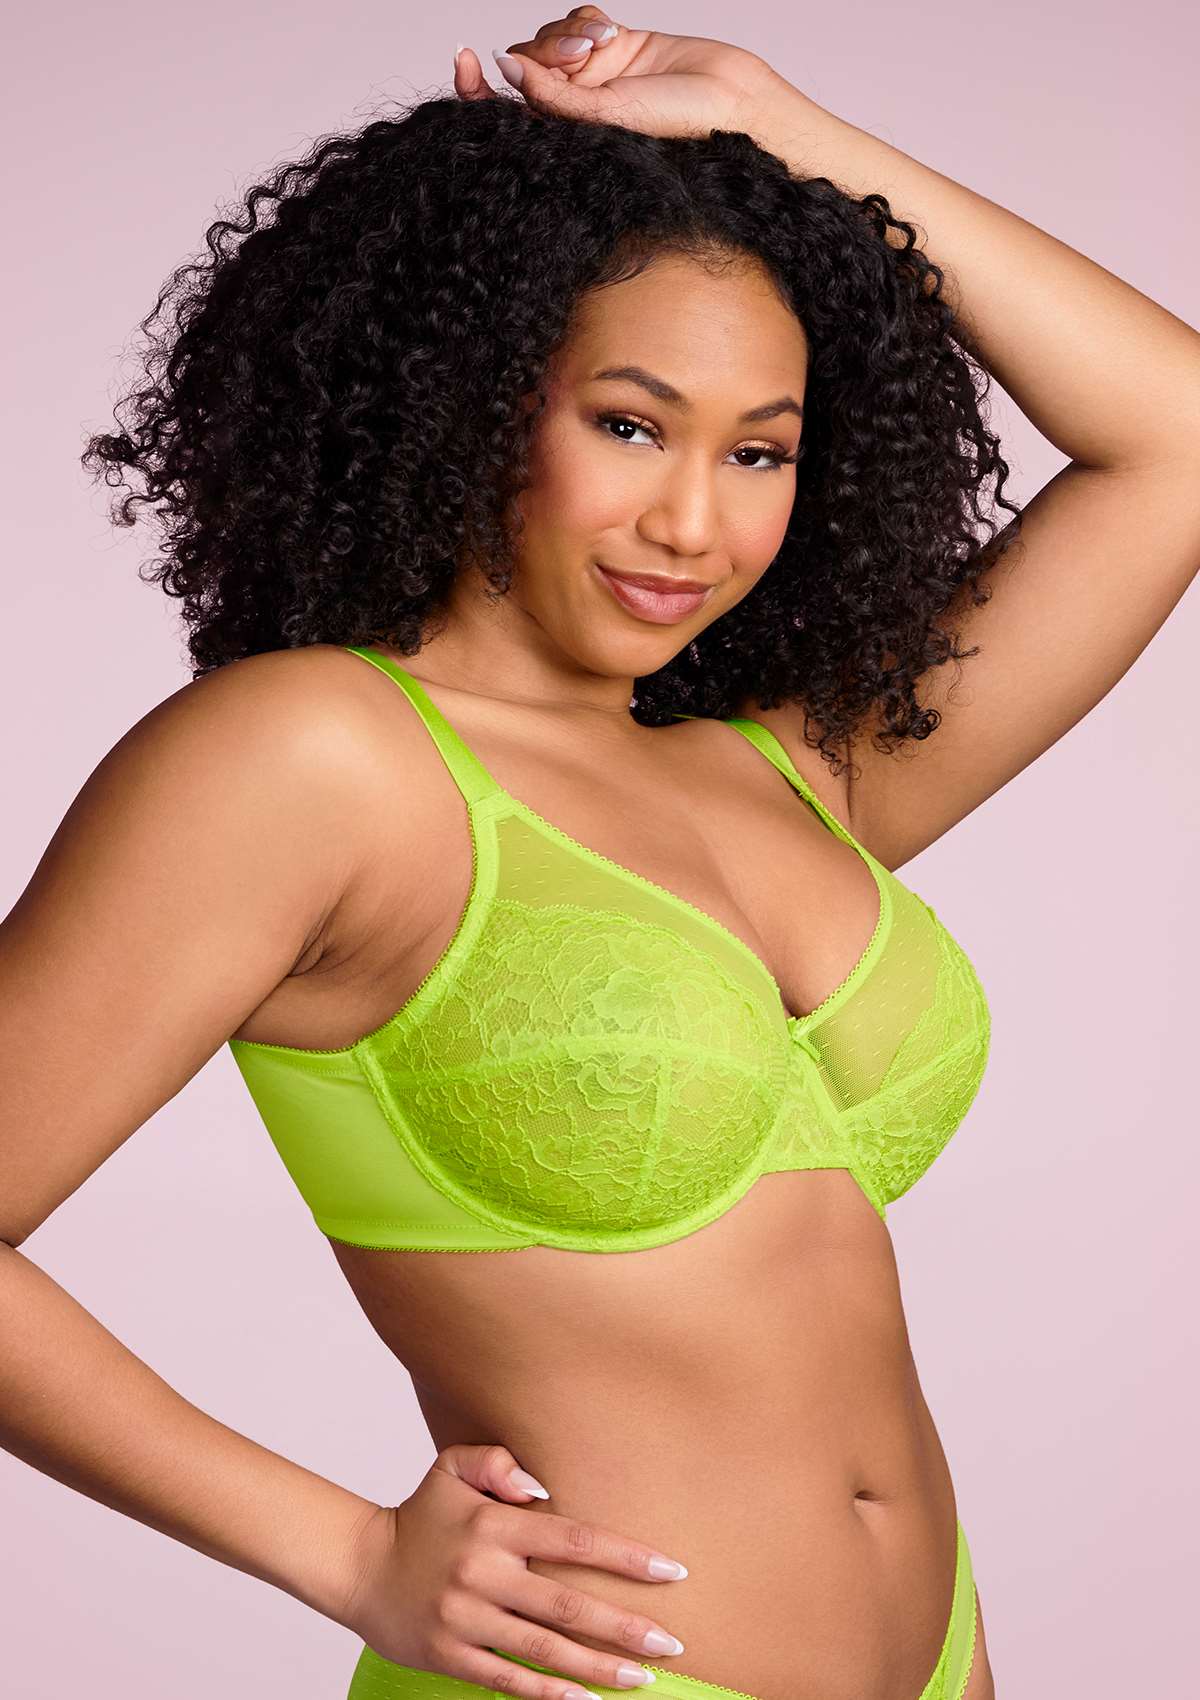 HSIA Enchante Full Cup Minimizing Bra: Supportive Unlined Lace Bra - Lime Green / 34 / DD/E